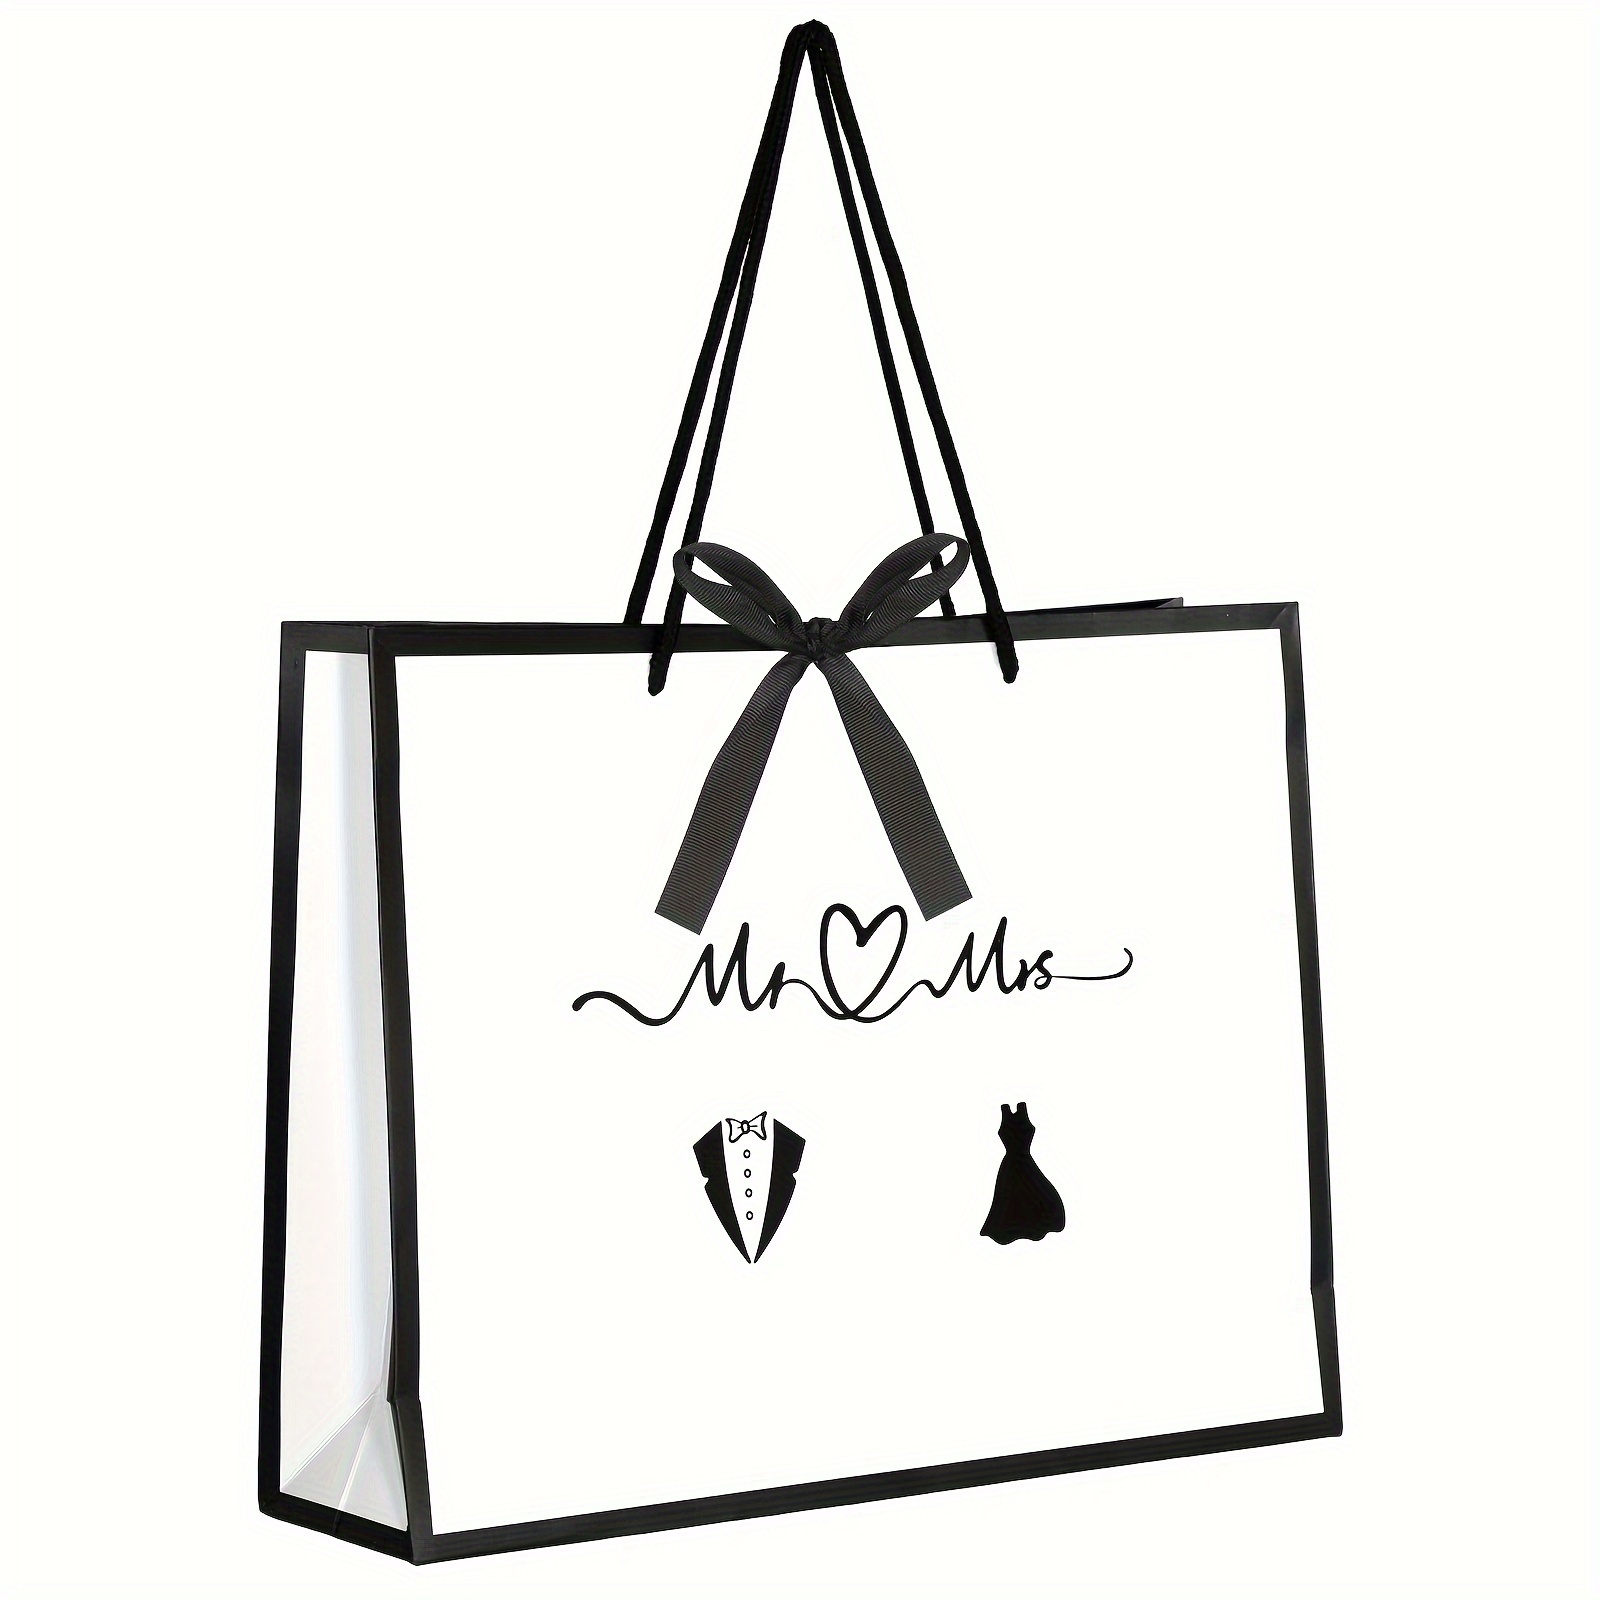 

Luxury Wedding Gift Bags For Couple, Bridal Shower, Engagement, Anniversary - Mr And Mrs Themed Paper Bags With Black Edging, Ladybug Forest Theme, Elegant Ribbon Handle